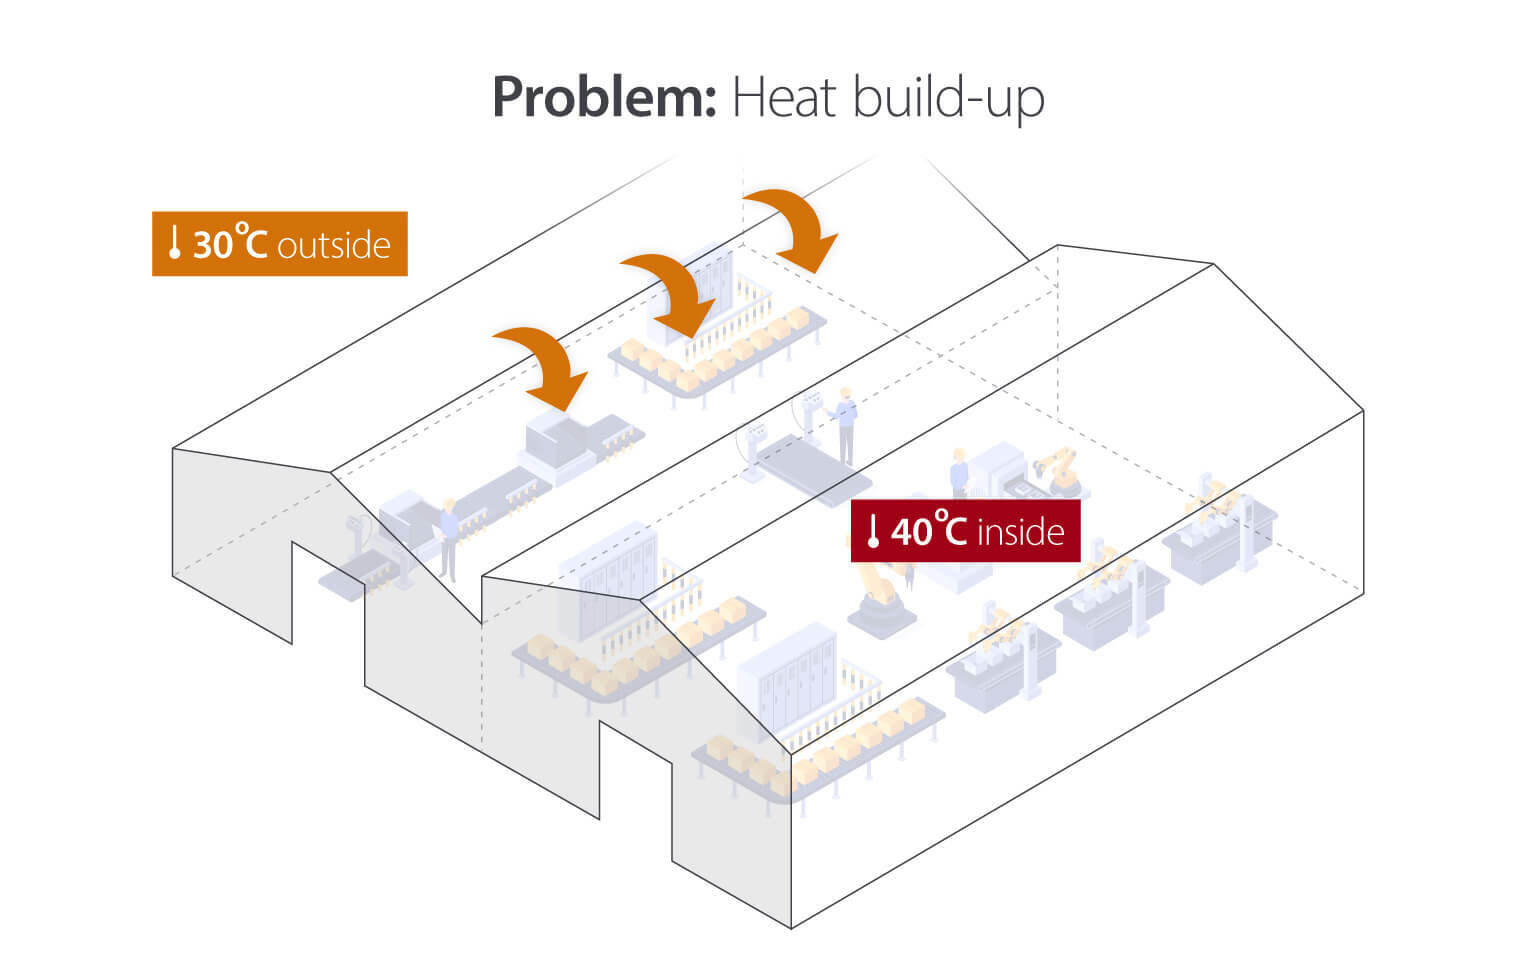 Problem of heat build-up in industrial settings